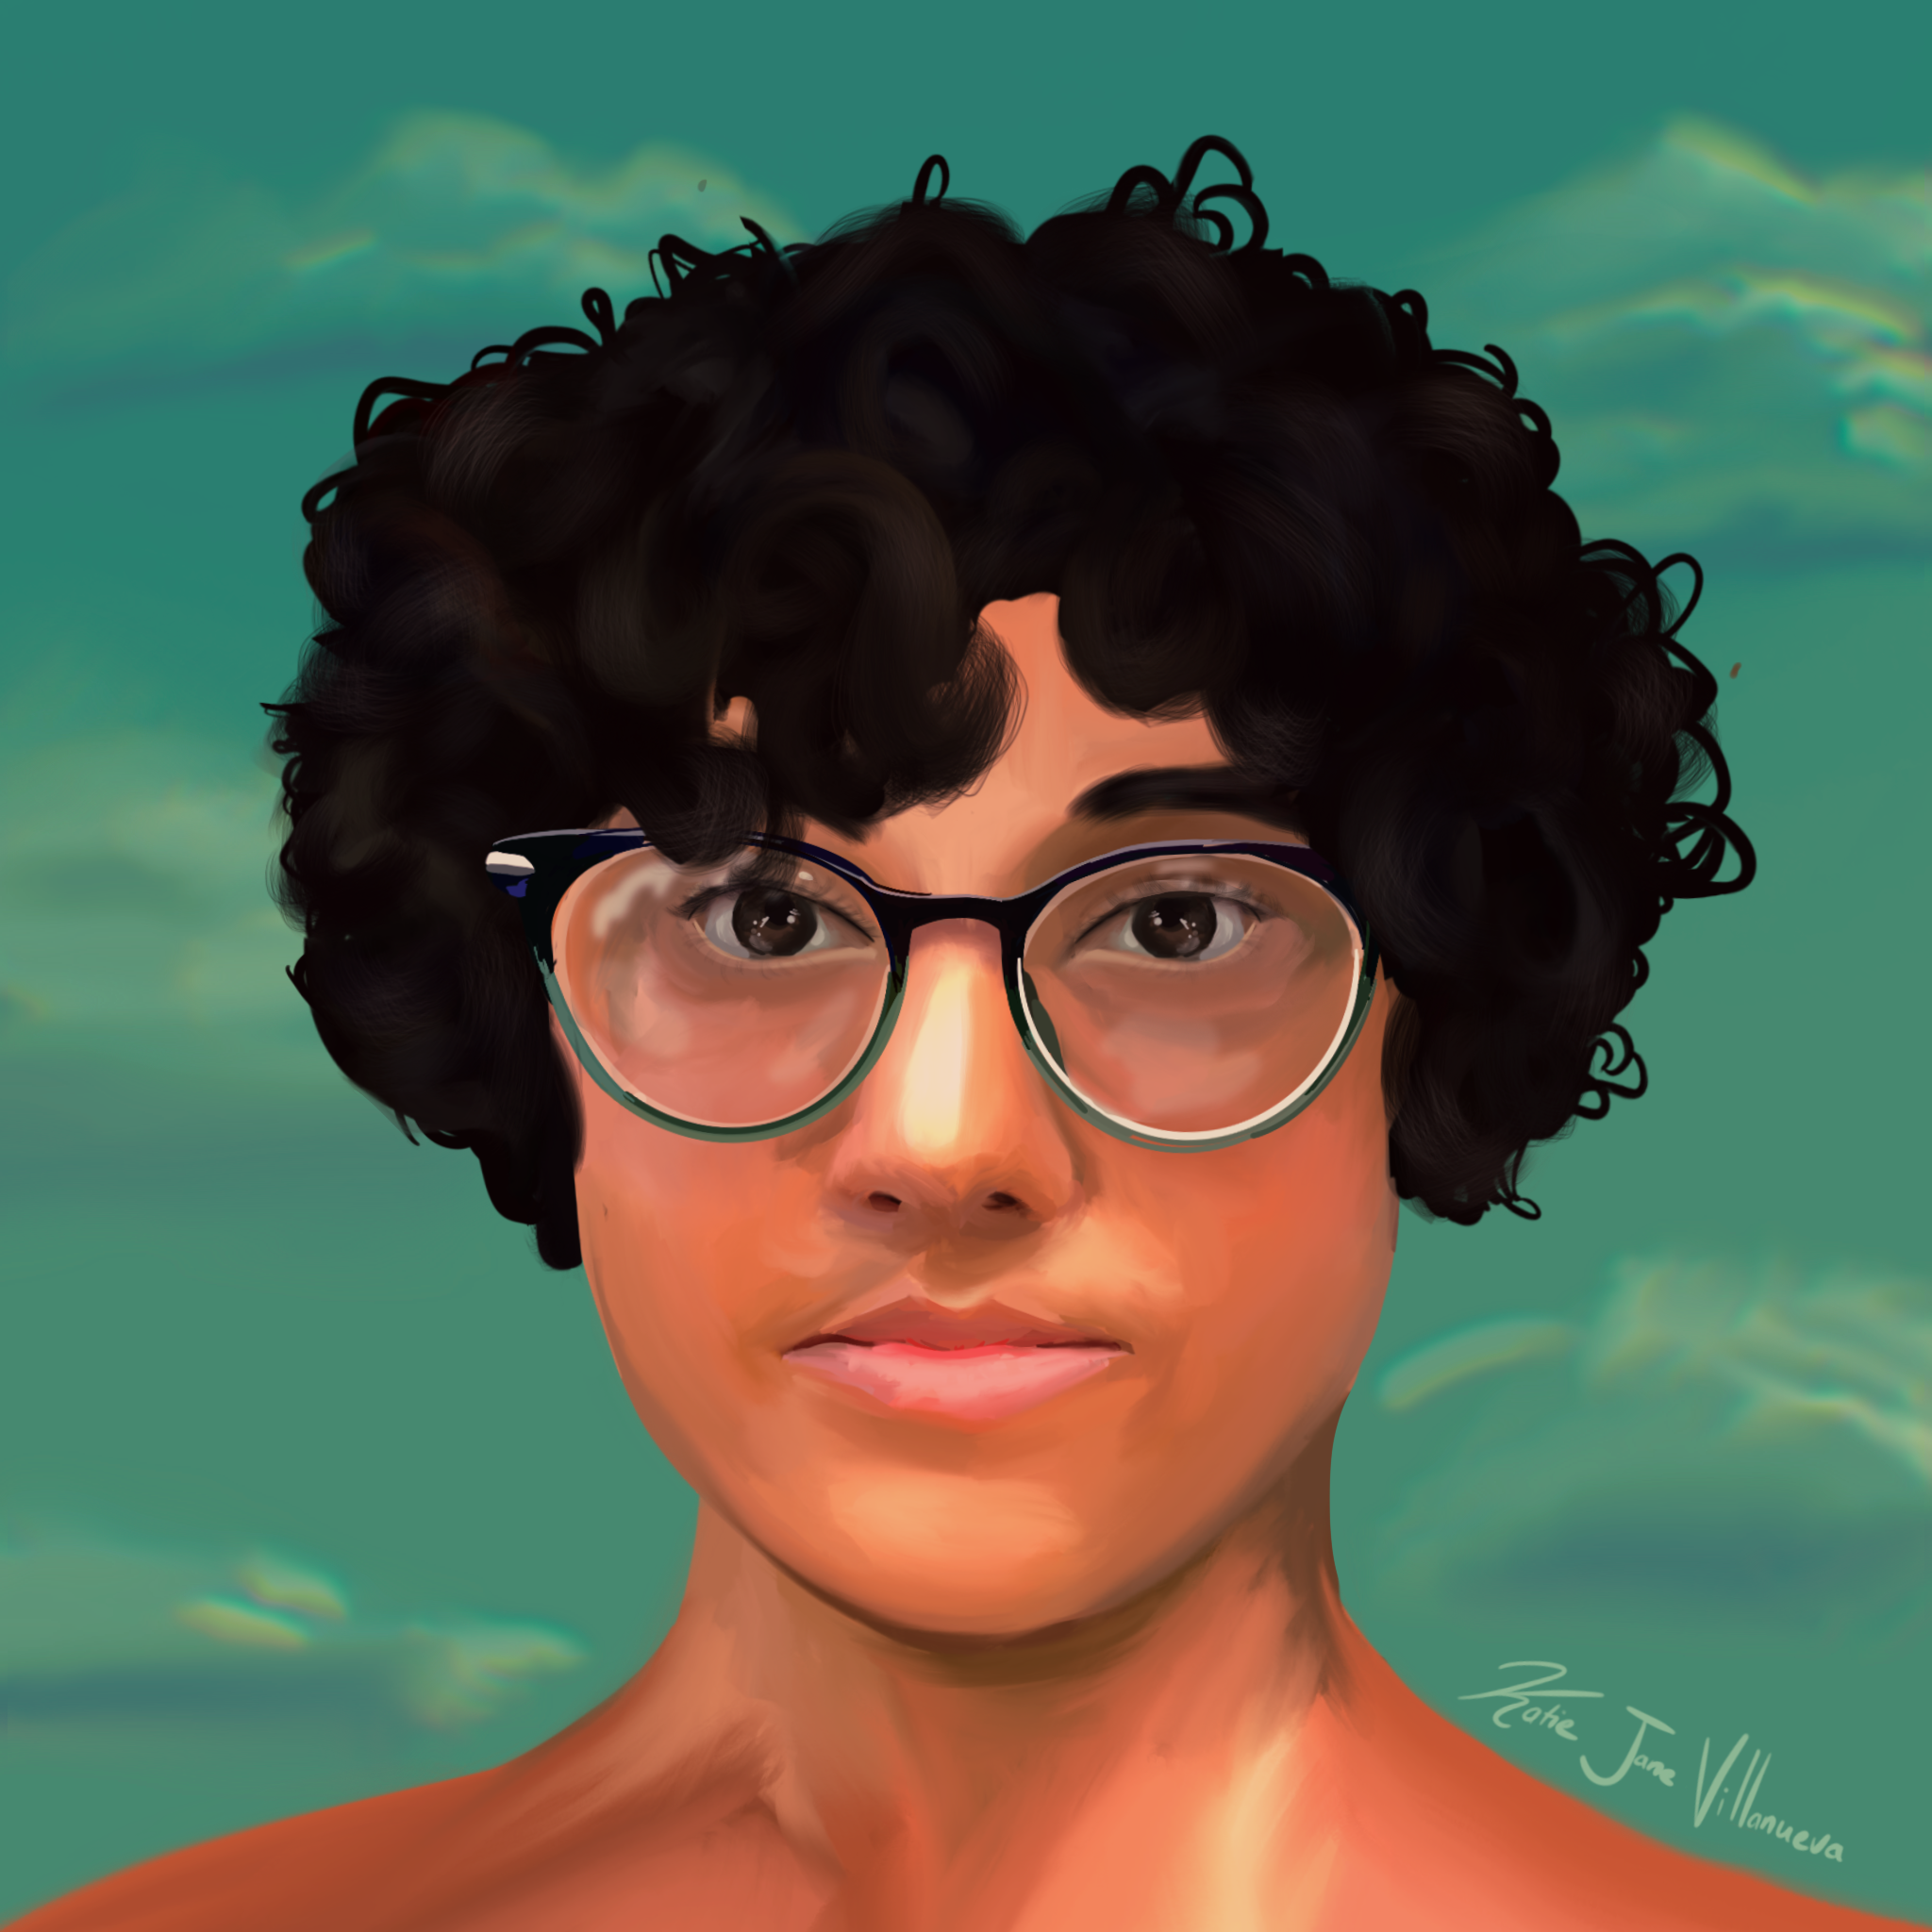 a image of a person with short curly hair and glasses